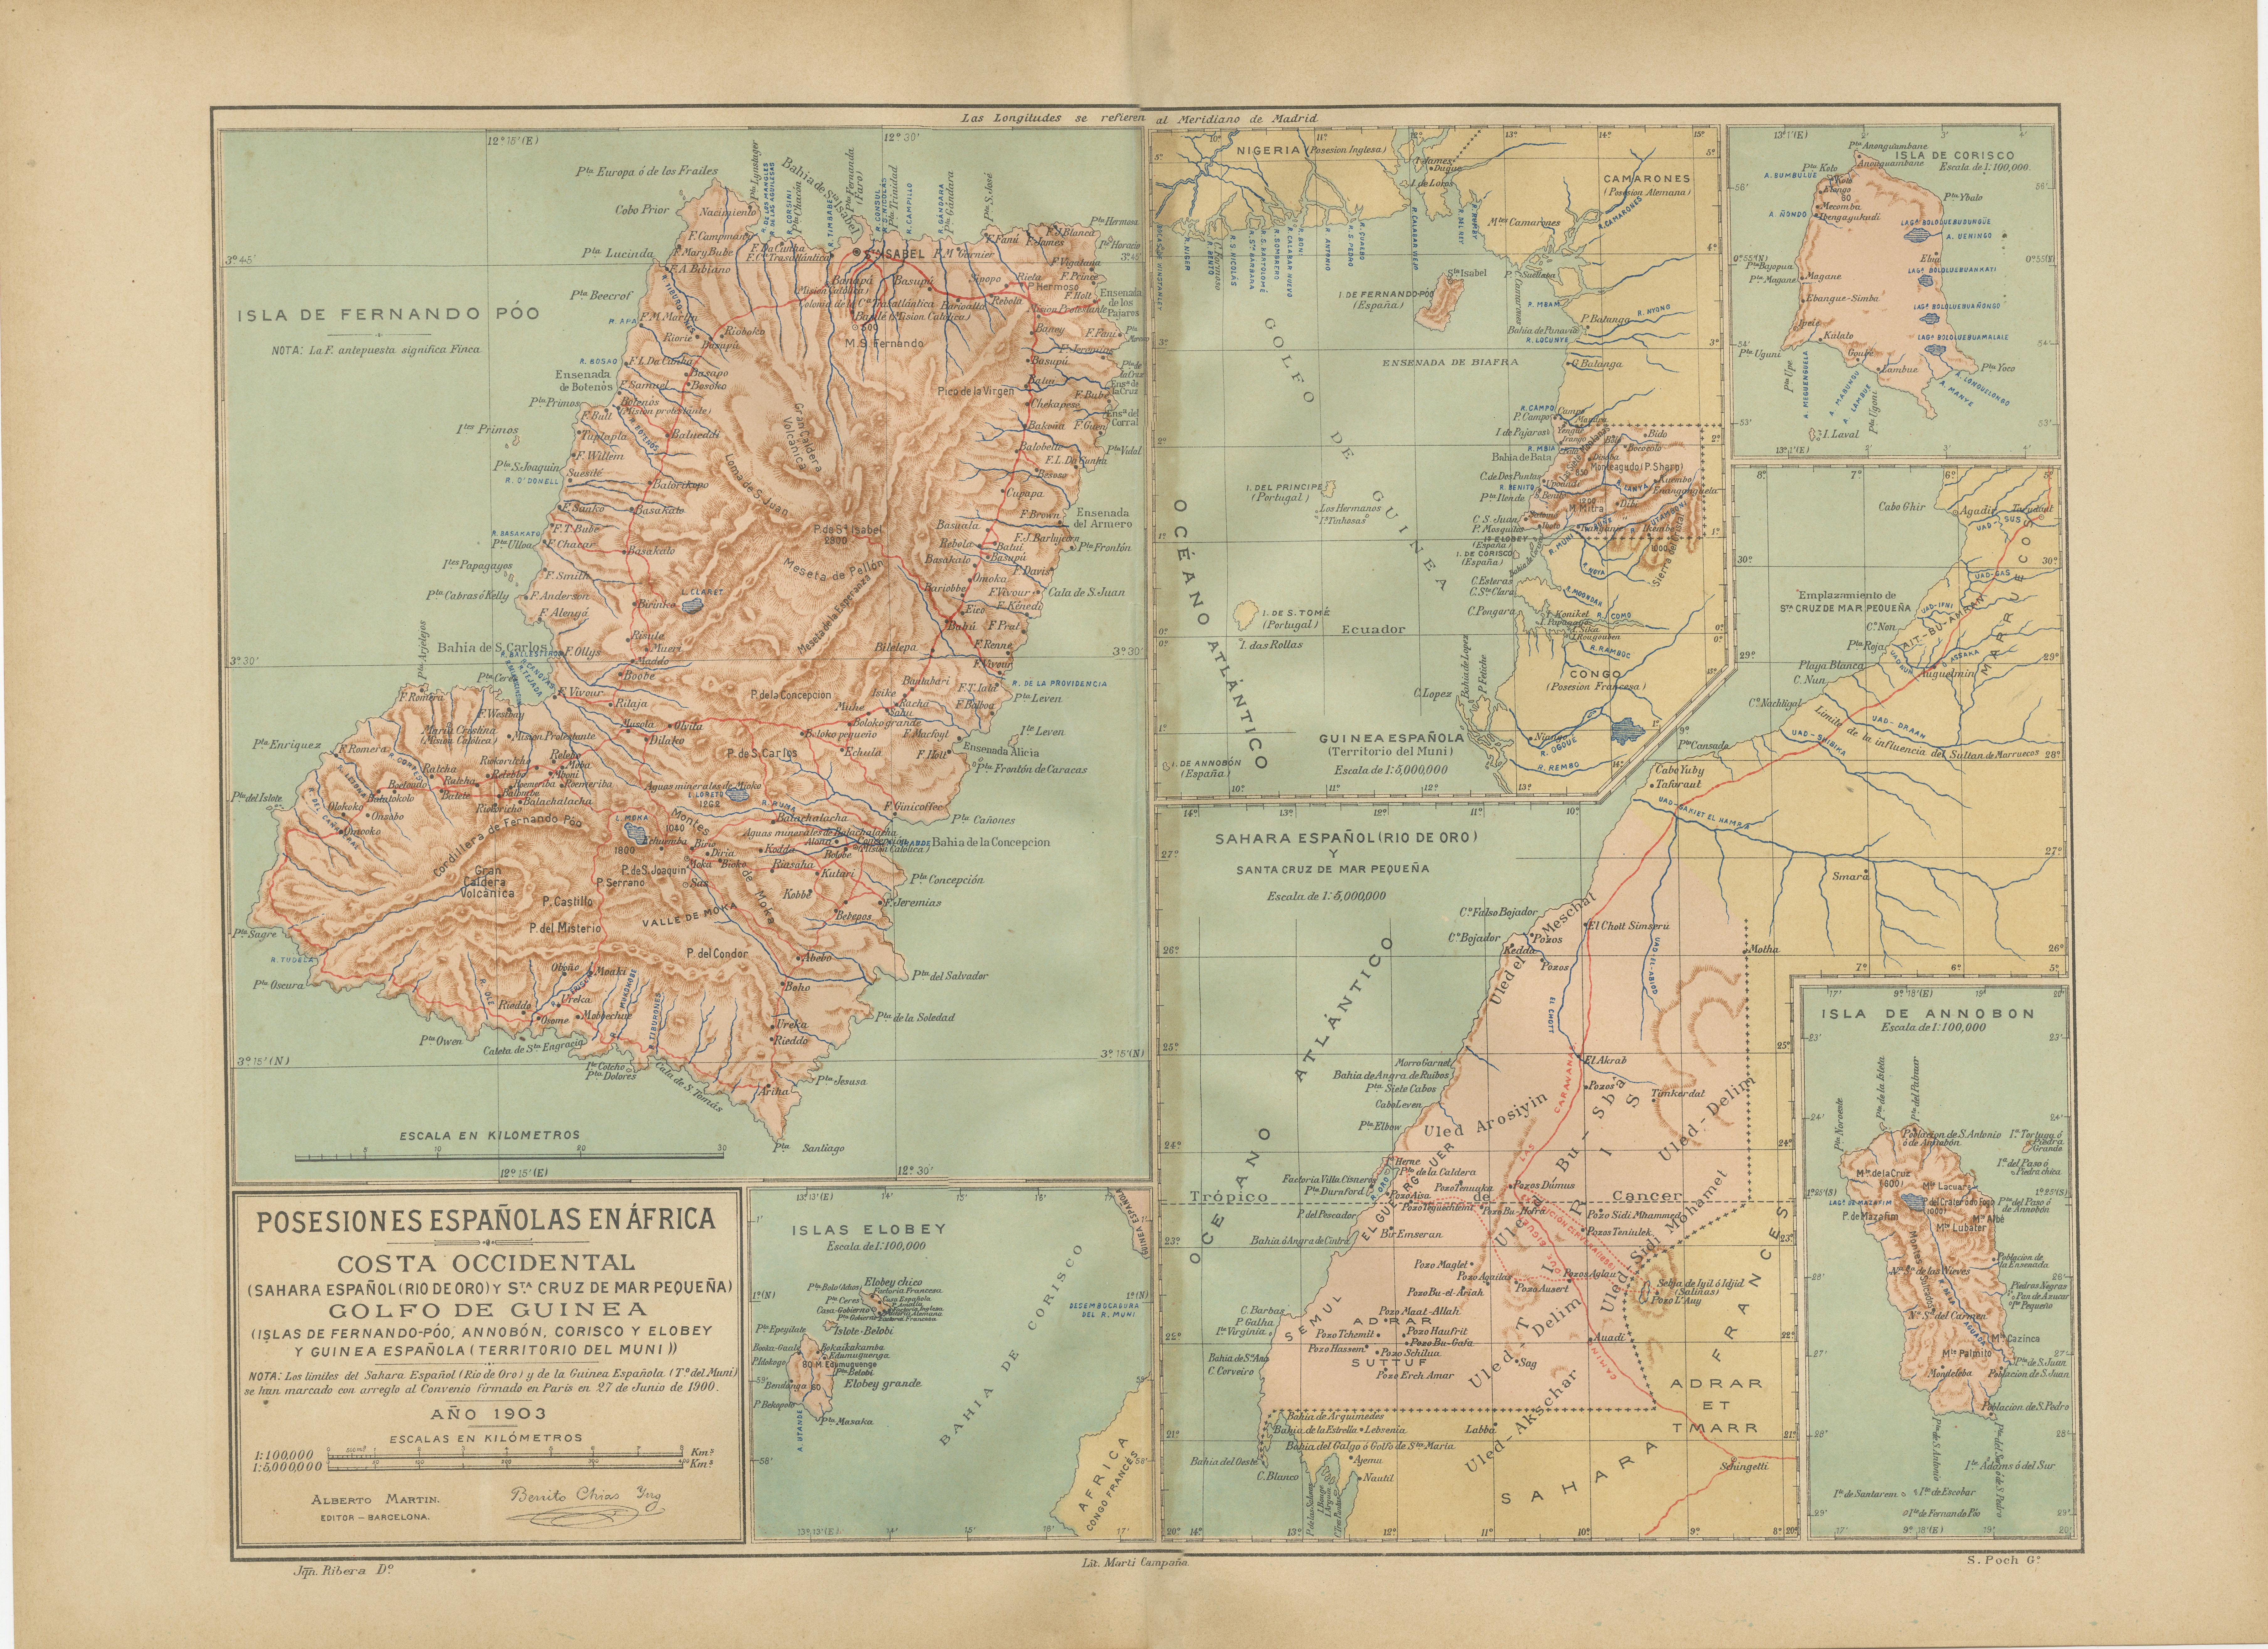 This is a historical map showing Spanish possessions in West Africa from the year 1903. The map includes the islands of Fernando Póo (now known as Bioko), part of the modern-day country of Equatorial Guinea, Annobón Island, and the Elobey Islands,